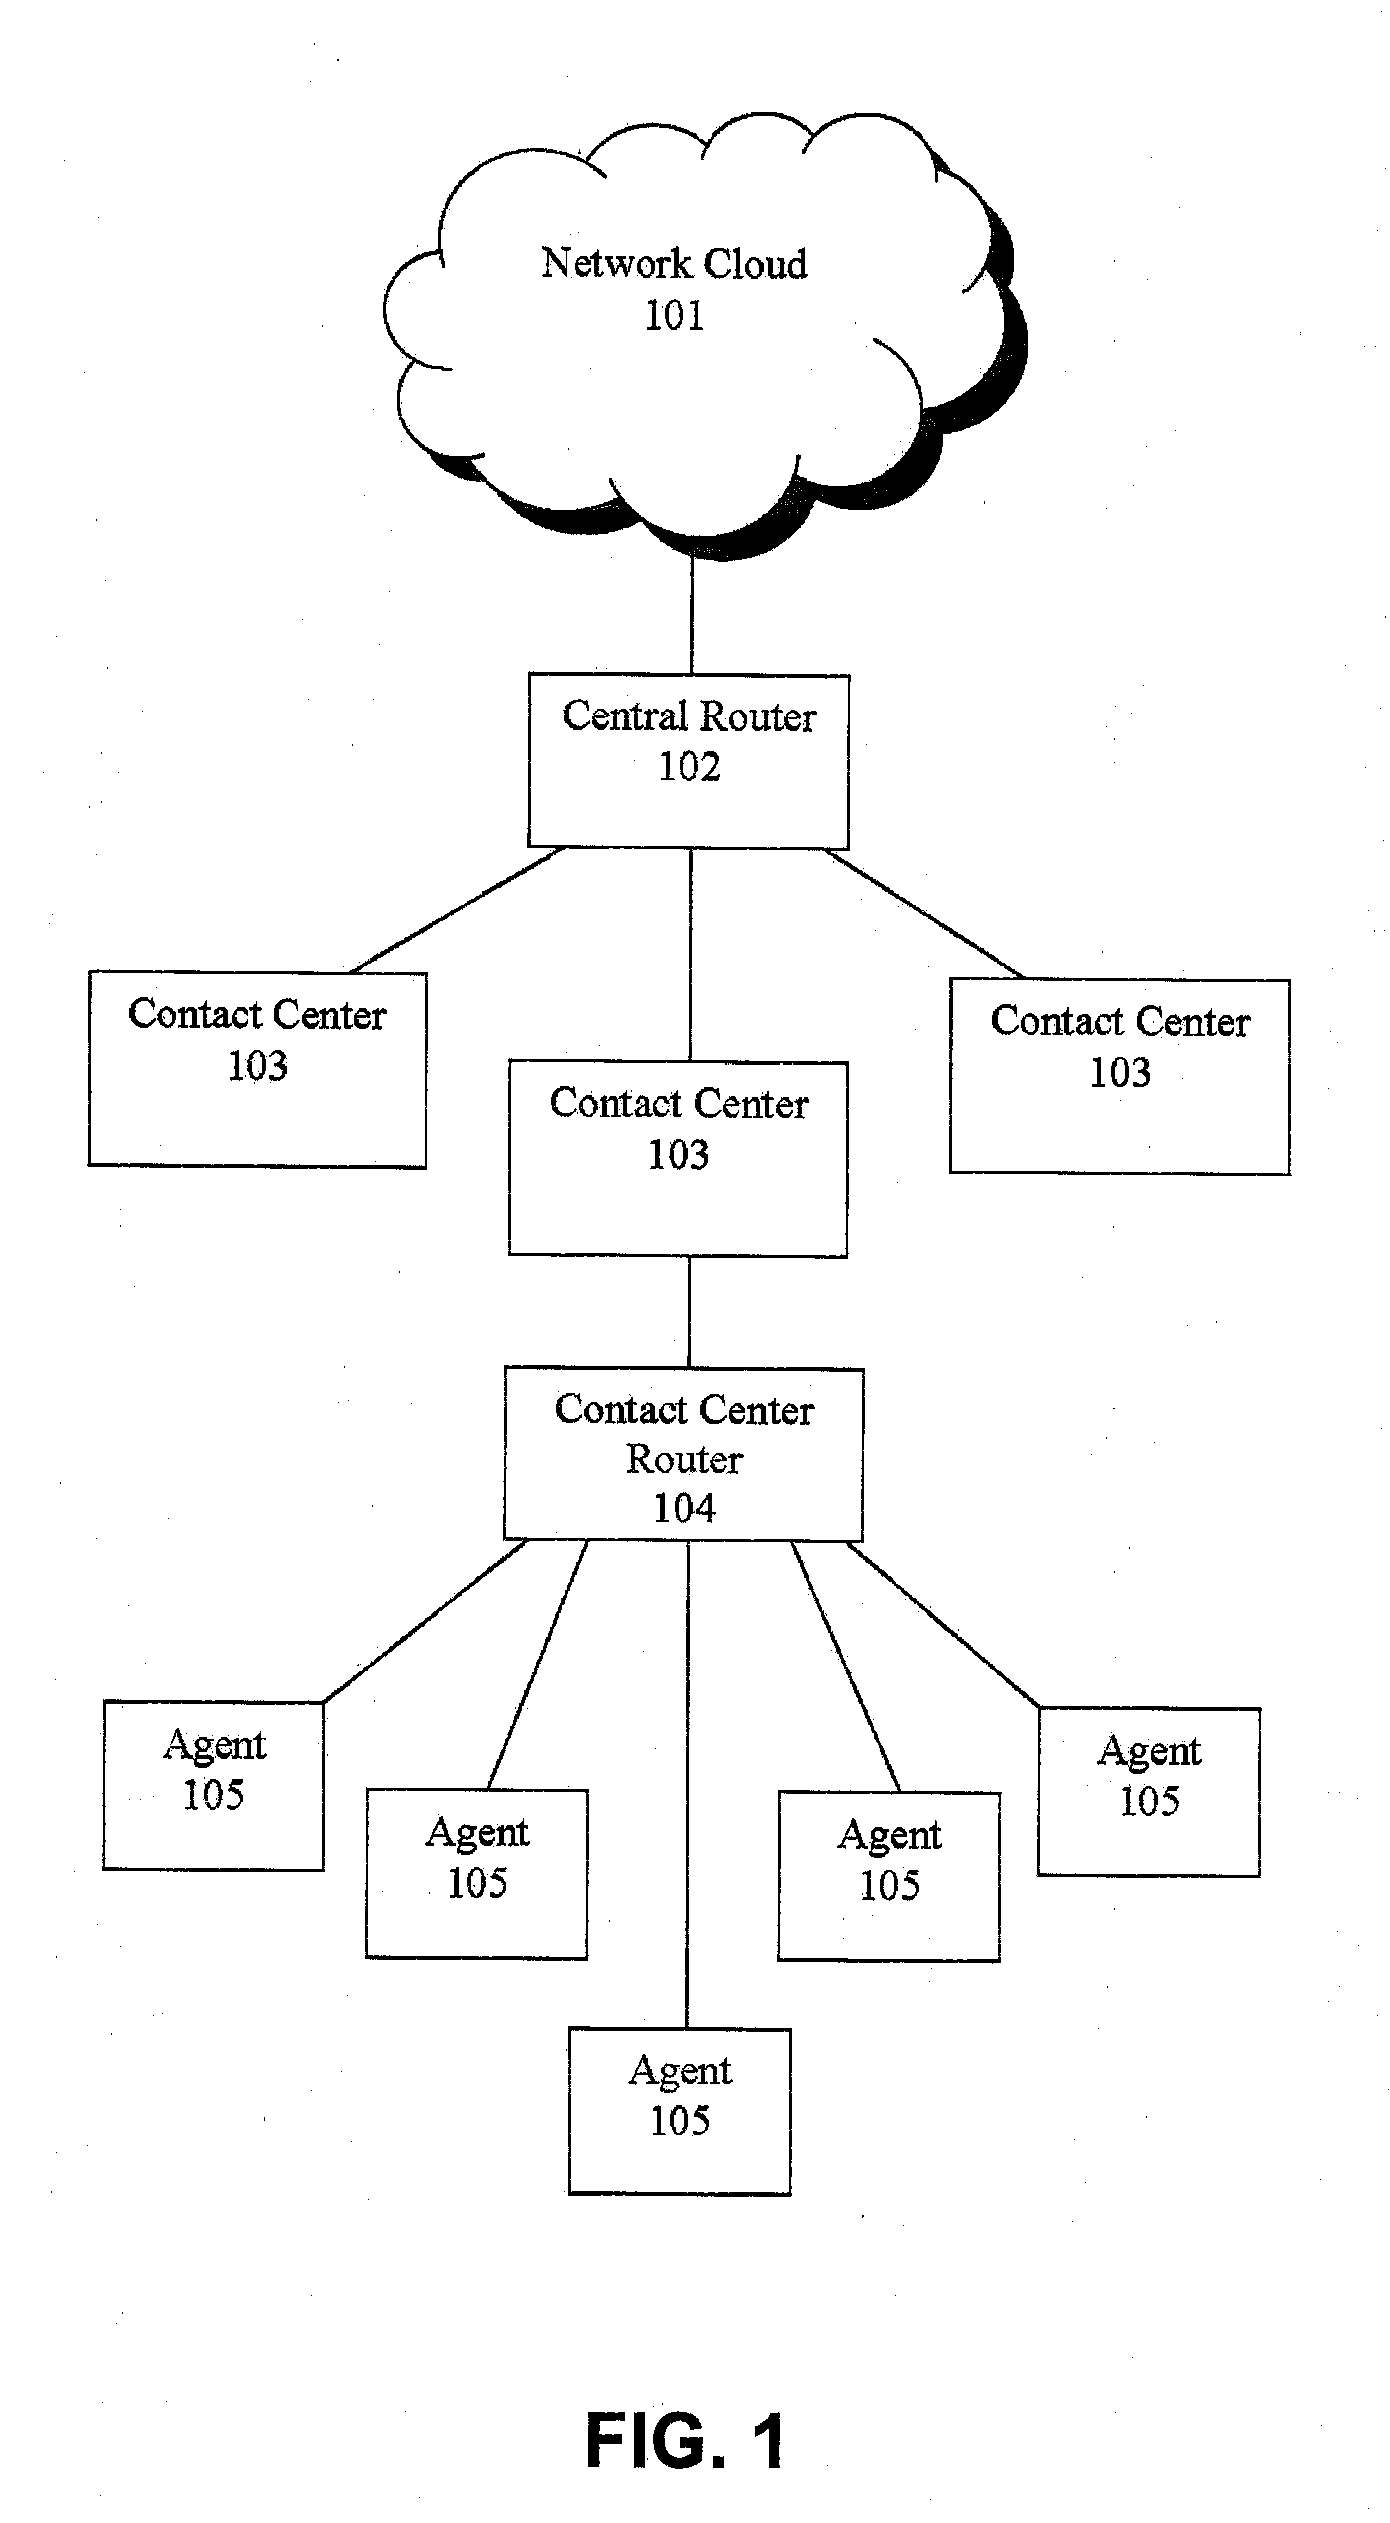 Agent satisfaction data for call routing based on pattern matching alogrithm